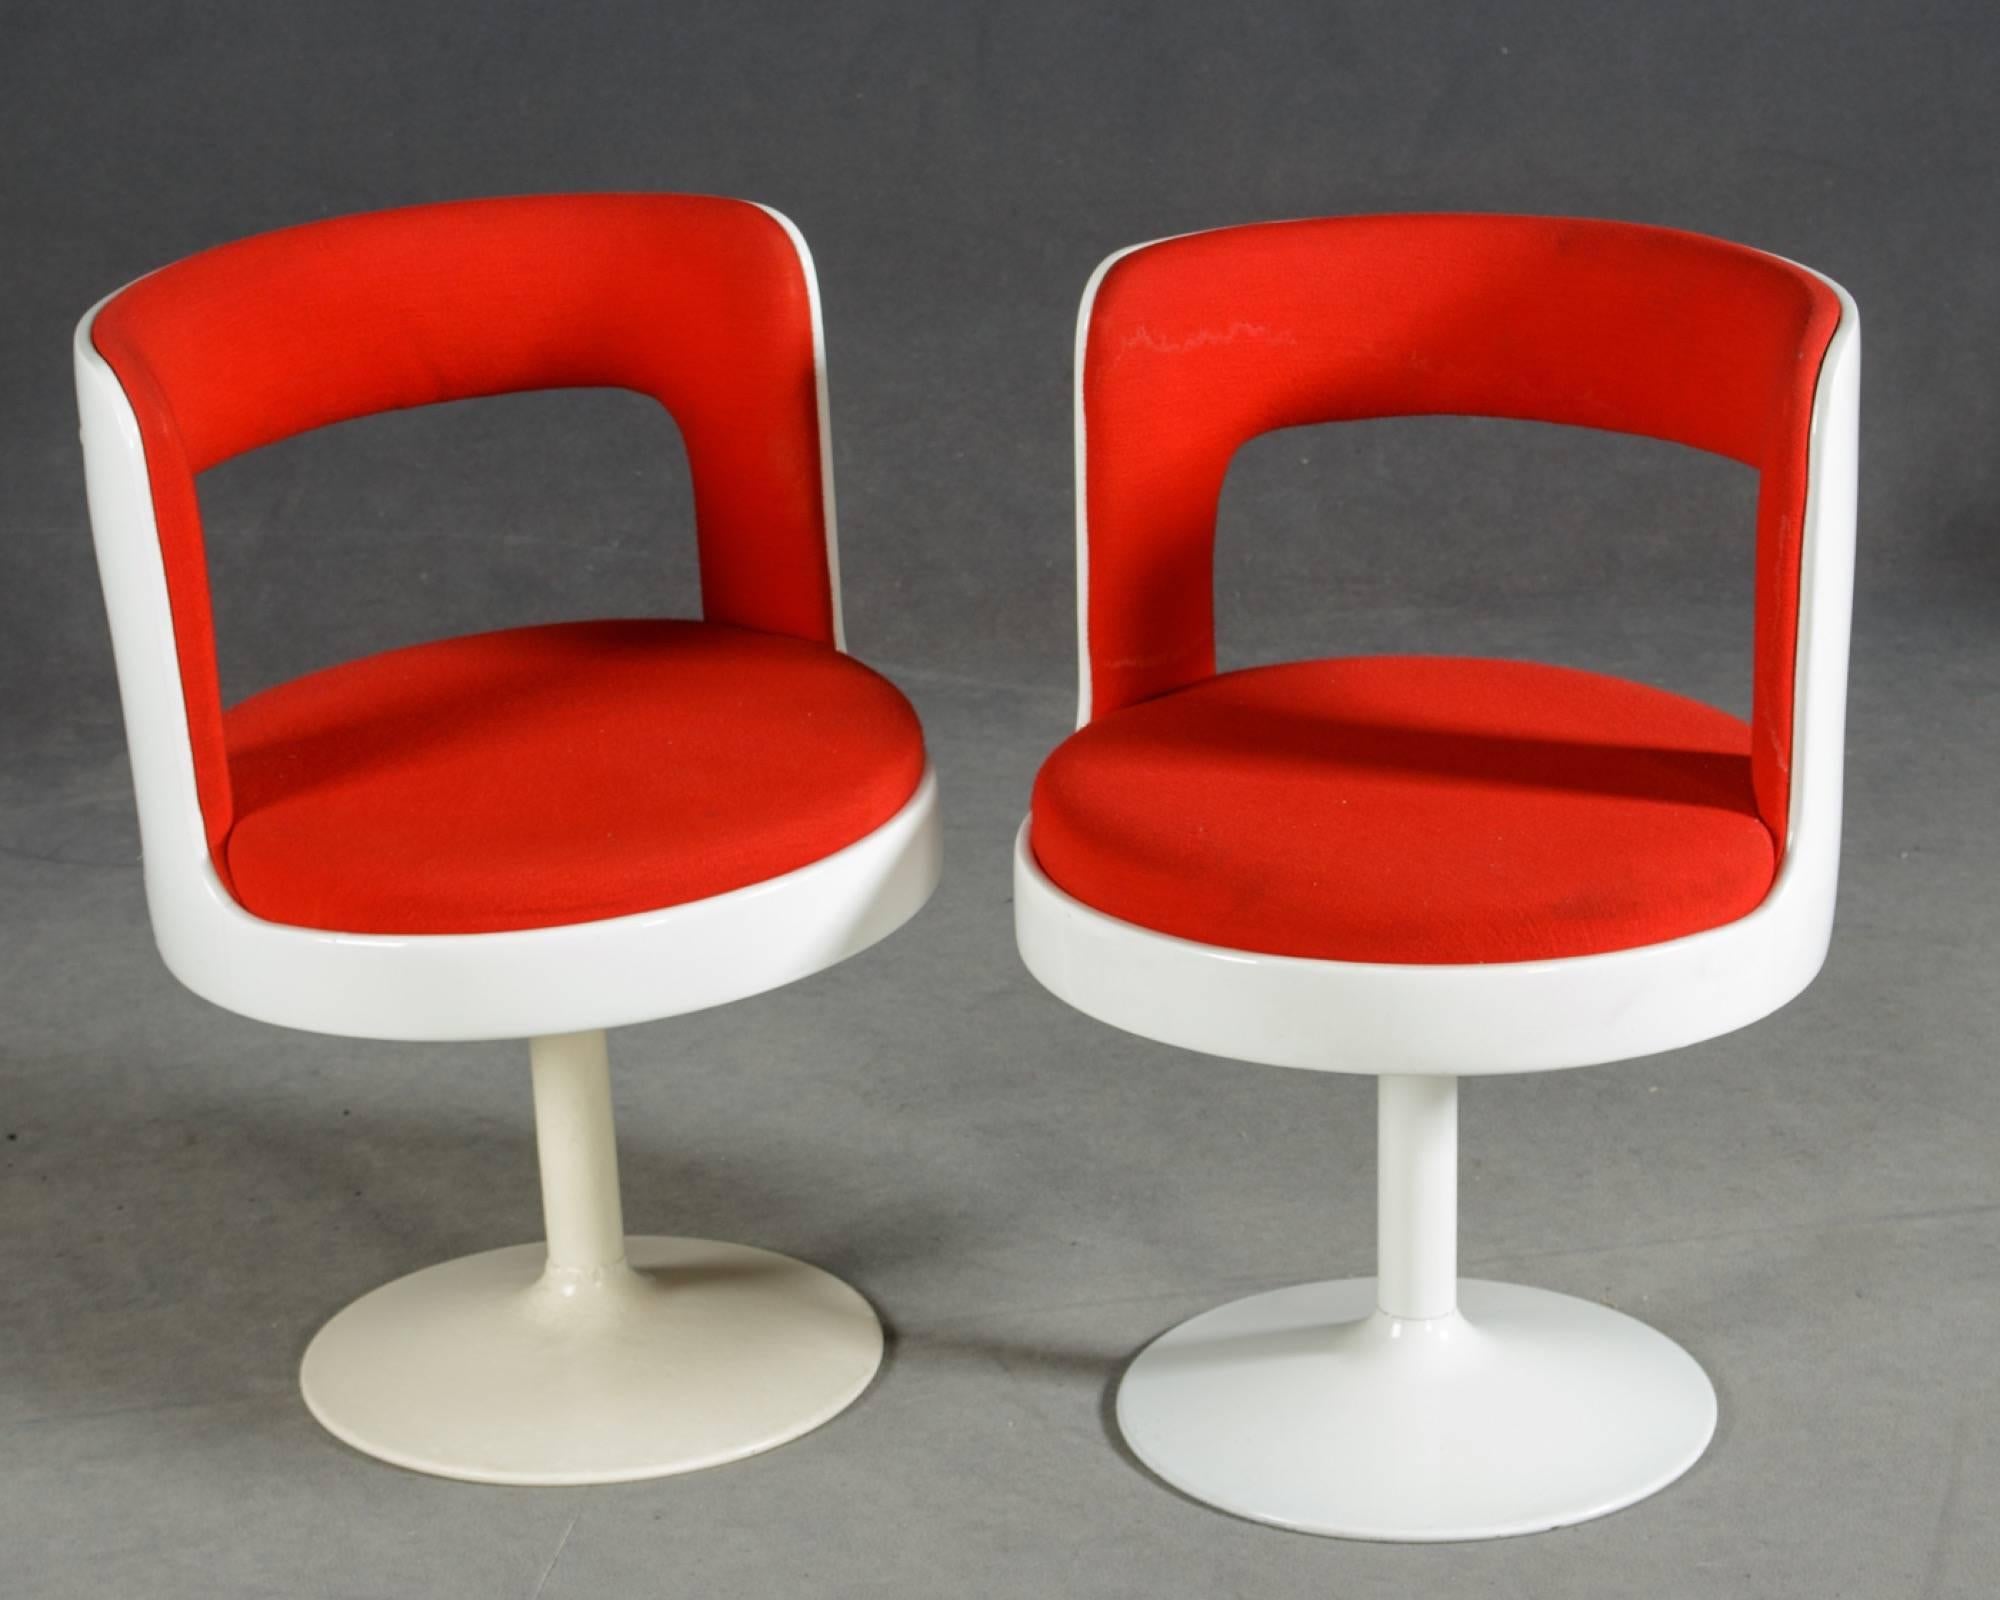 Two easy chairs, 1970s, Wohl Asko, Finland
Probably designed by Esko Pajamies for Asko, Finland. Plastic seat shafts, rotatable. Padding with red wool fabric.